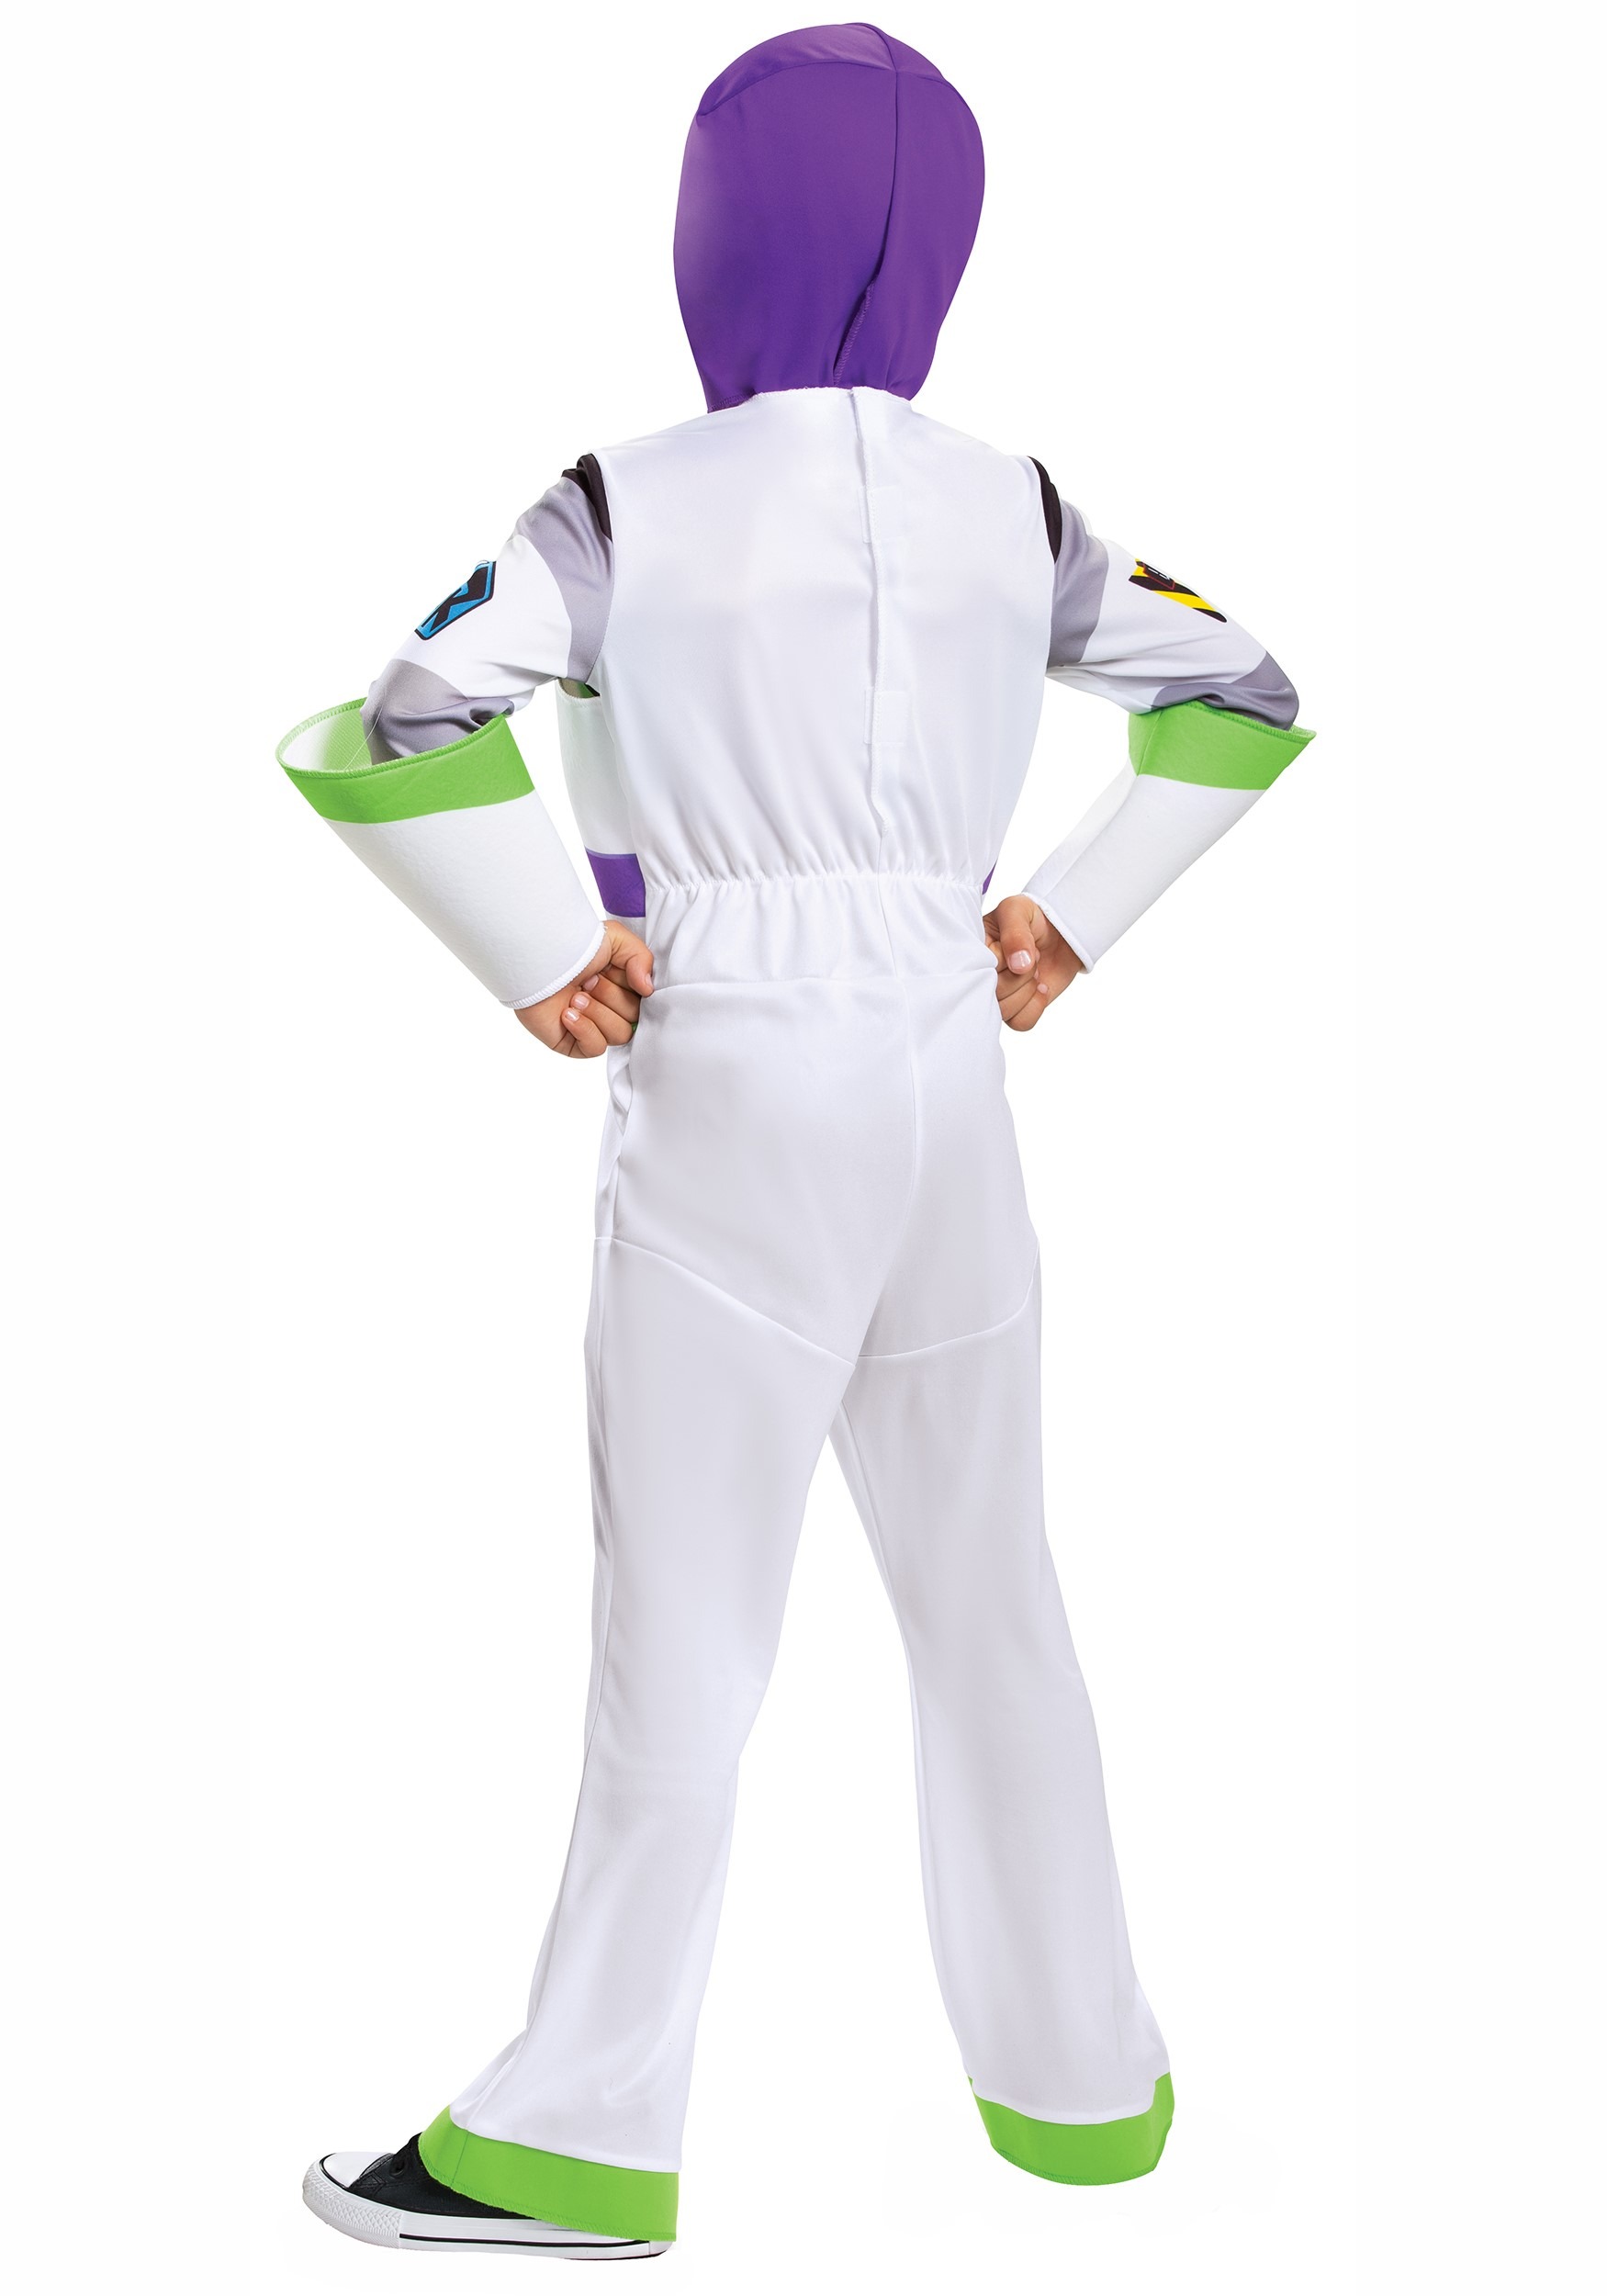 https://images.fun.com/products/60477/2-1-125606/toy-story-toddler-buzz-lightyear-classic-costume2.jpg